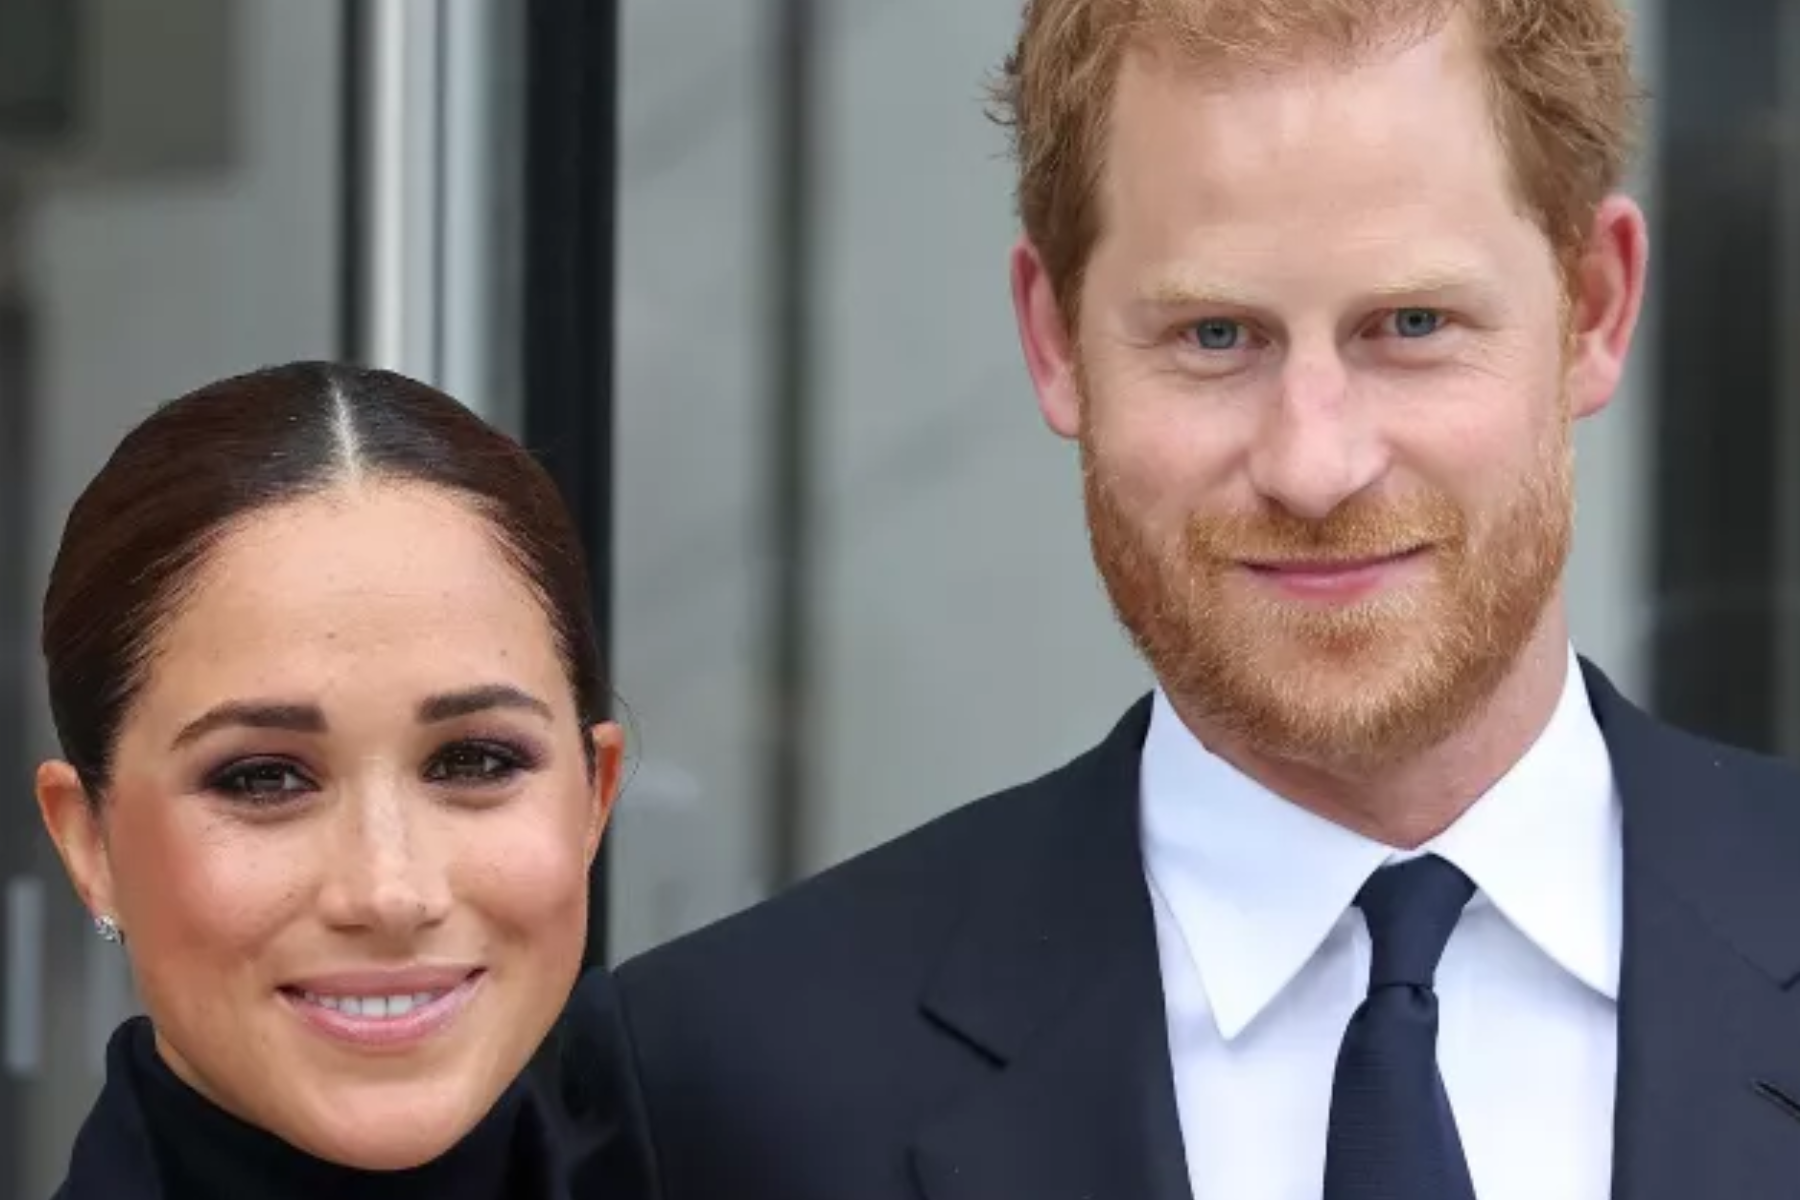 Prince Harry And Meghan Markle Call Prince Archie And Princess Lilibet’s Titles Their “Birthright”